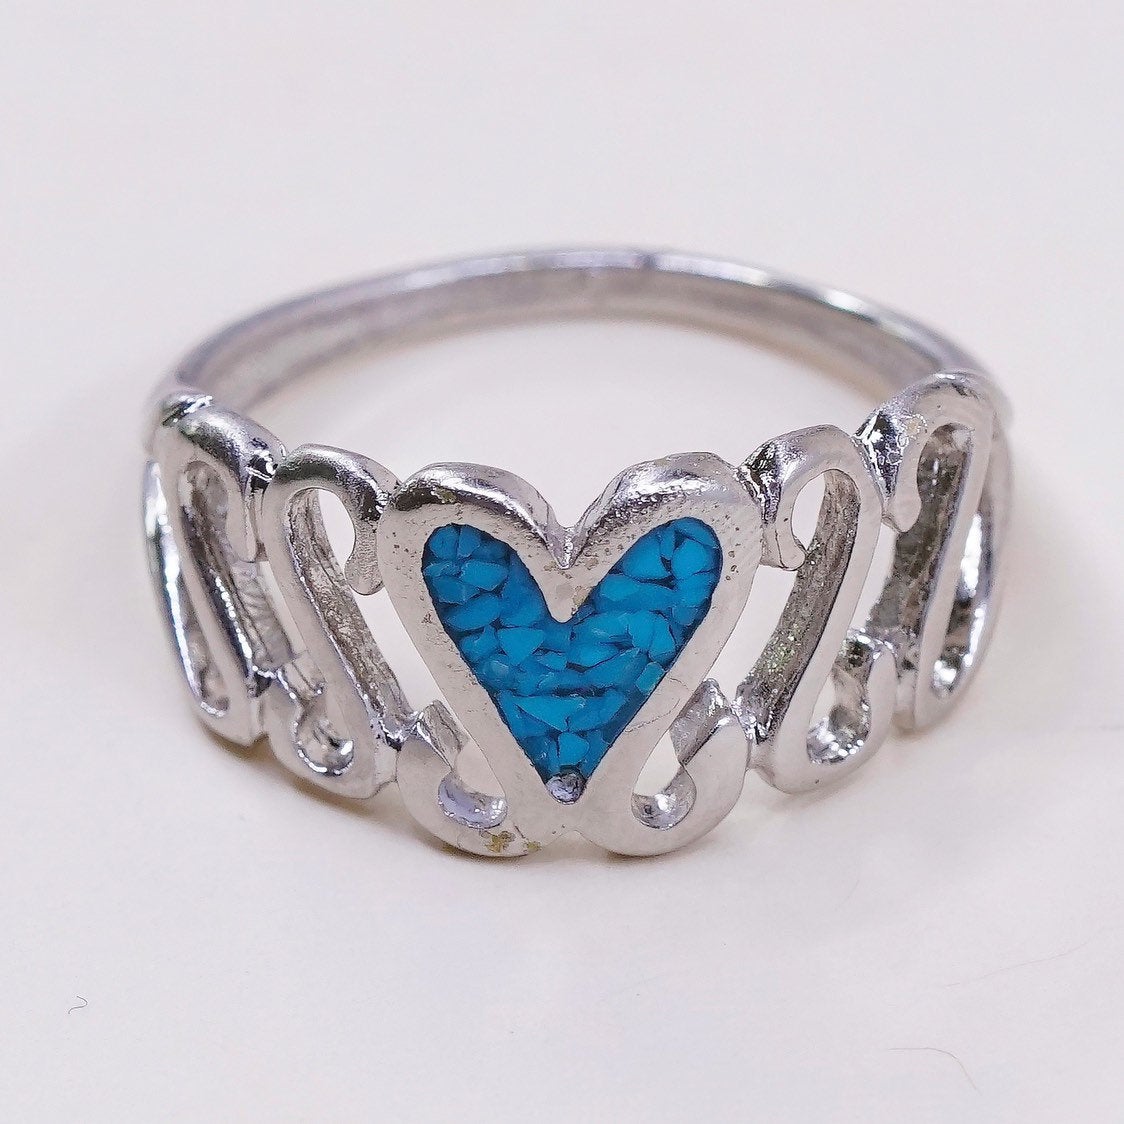 sz 9, vtg Sterling silver handmade ring, 925 band w/ turquoise heart